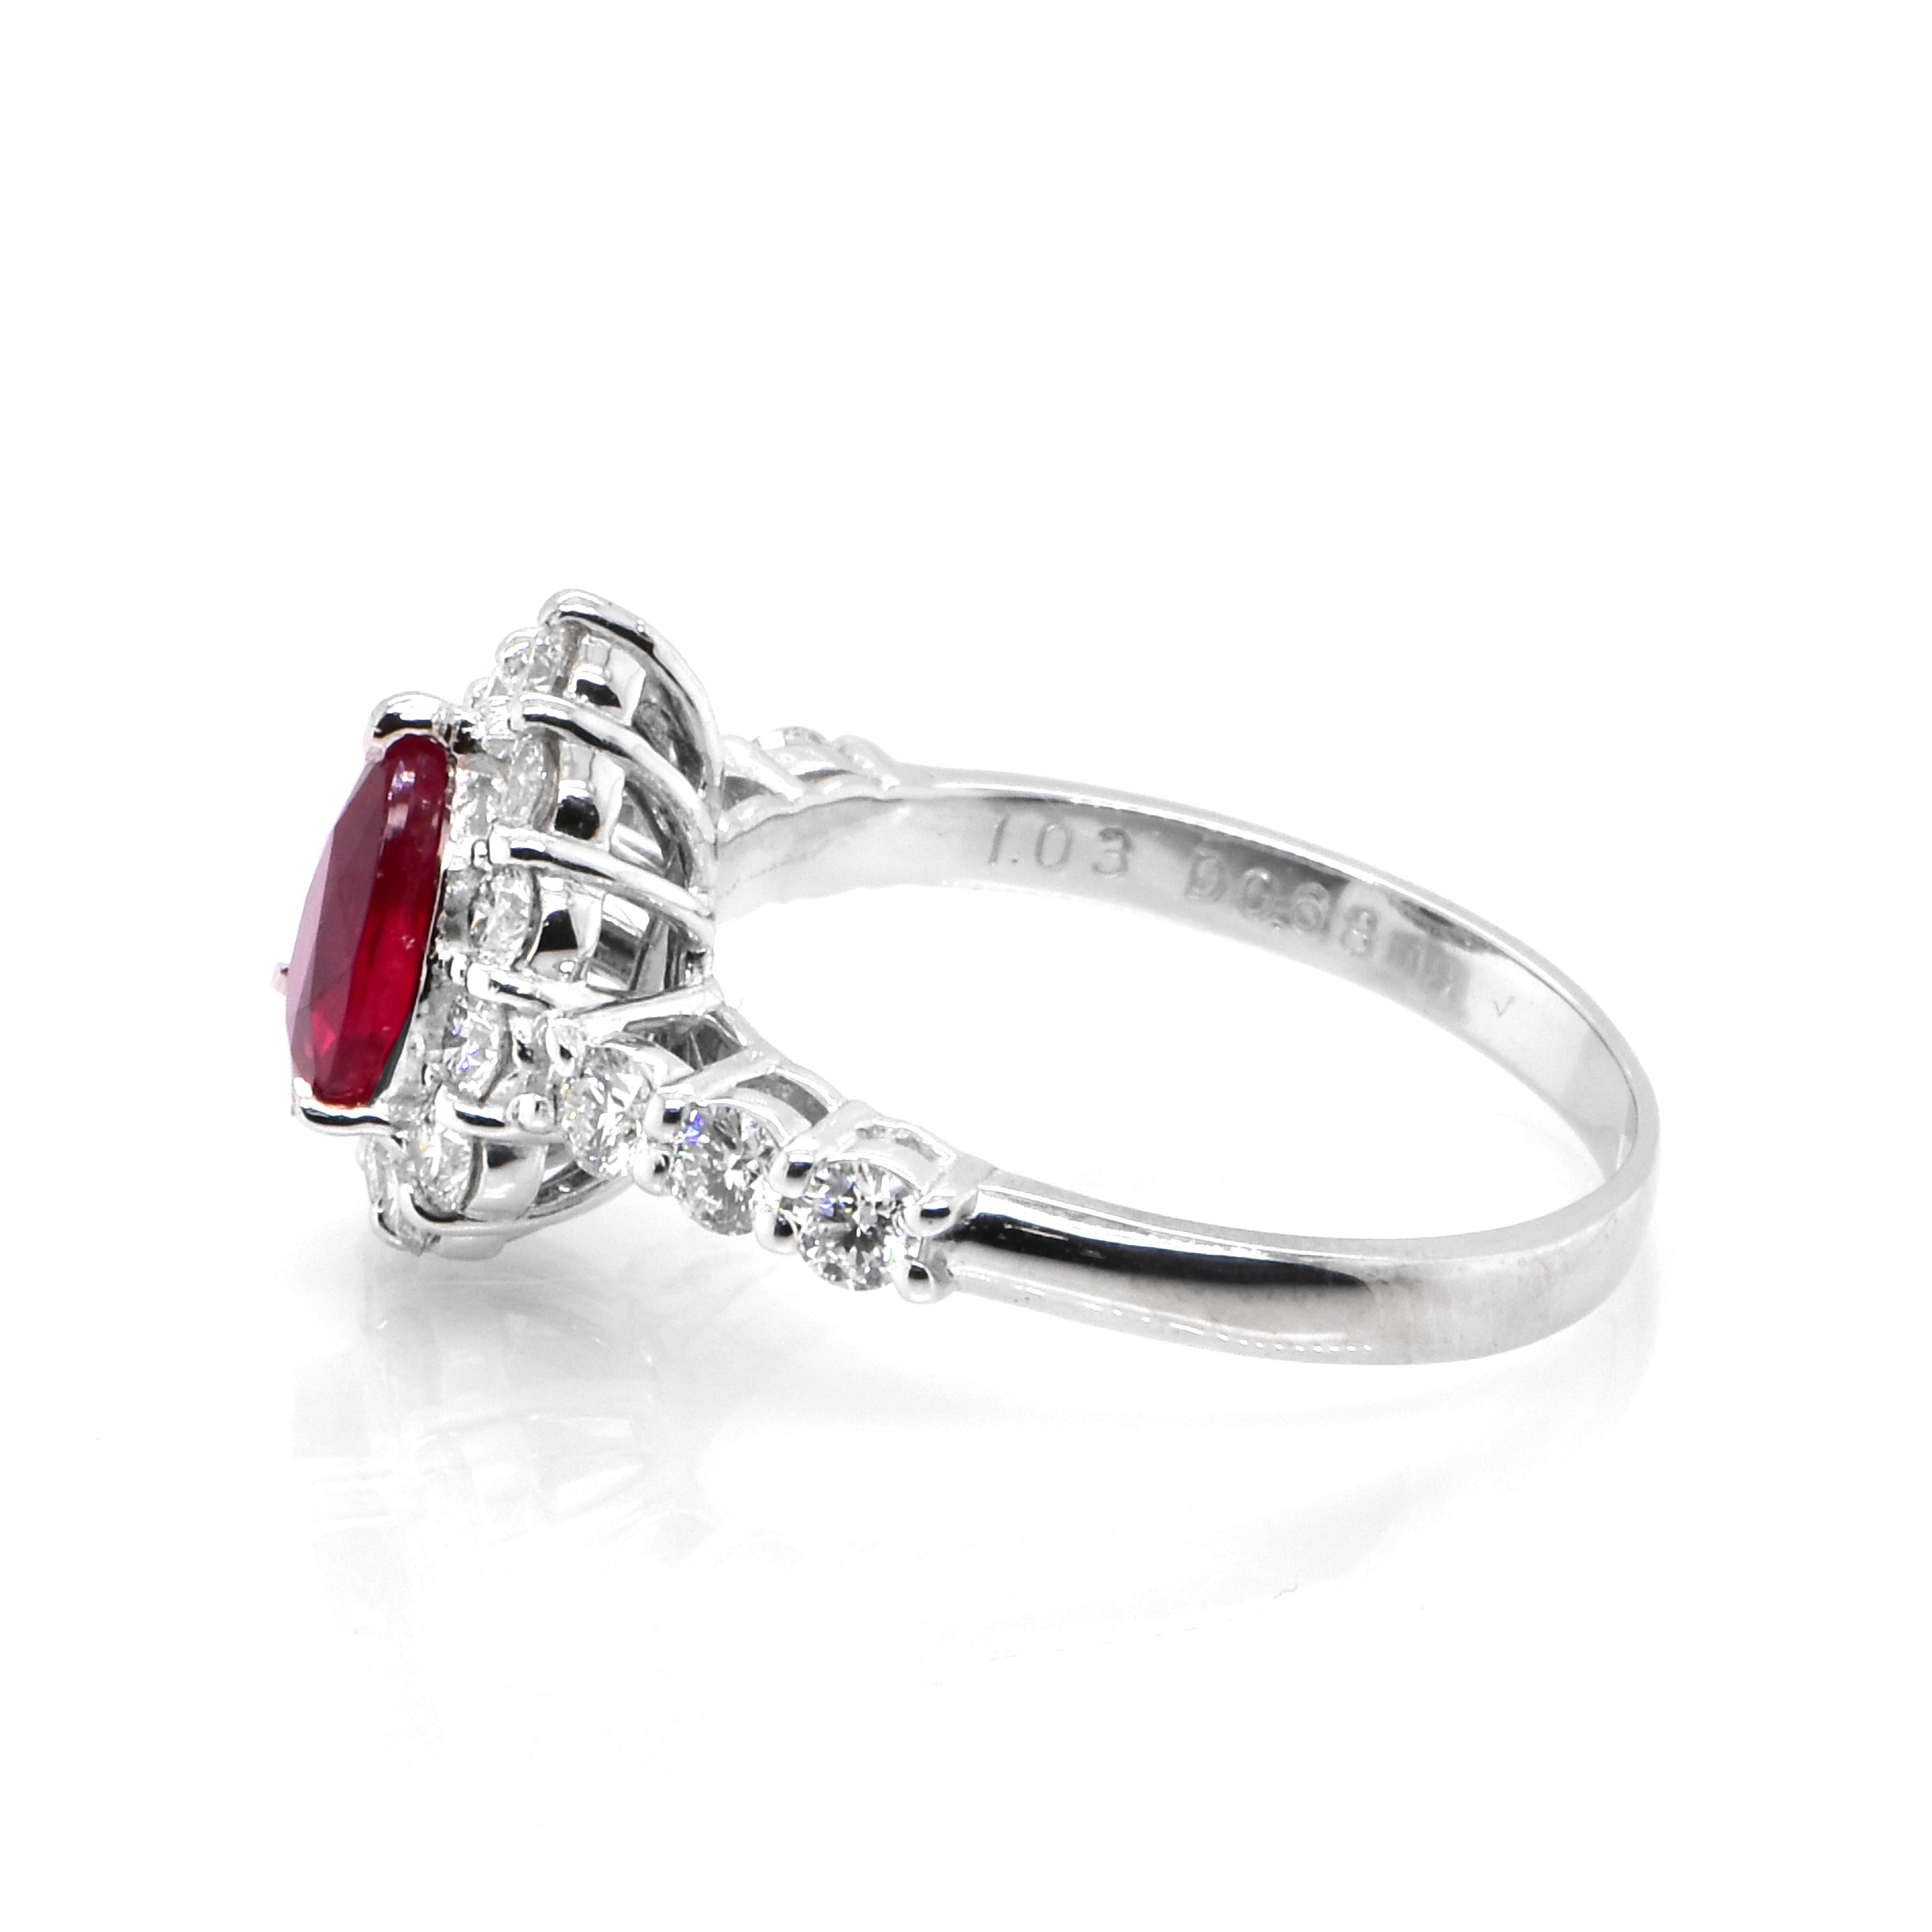 Modern GIA Certified 1.03 Carat, Pigeon Blood Red, Burmese Ruby Ring Made in Platinum For Sale